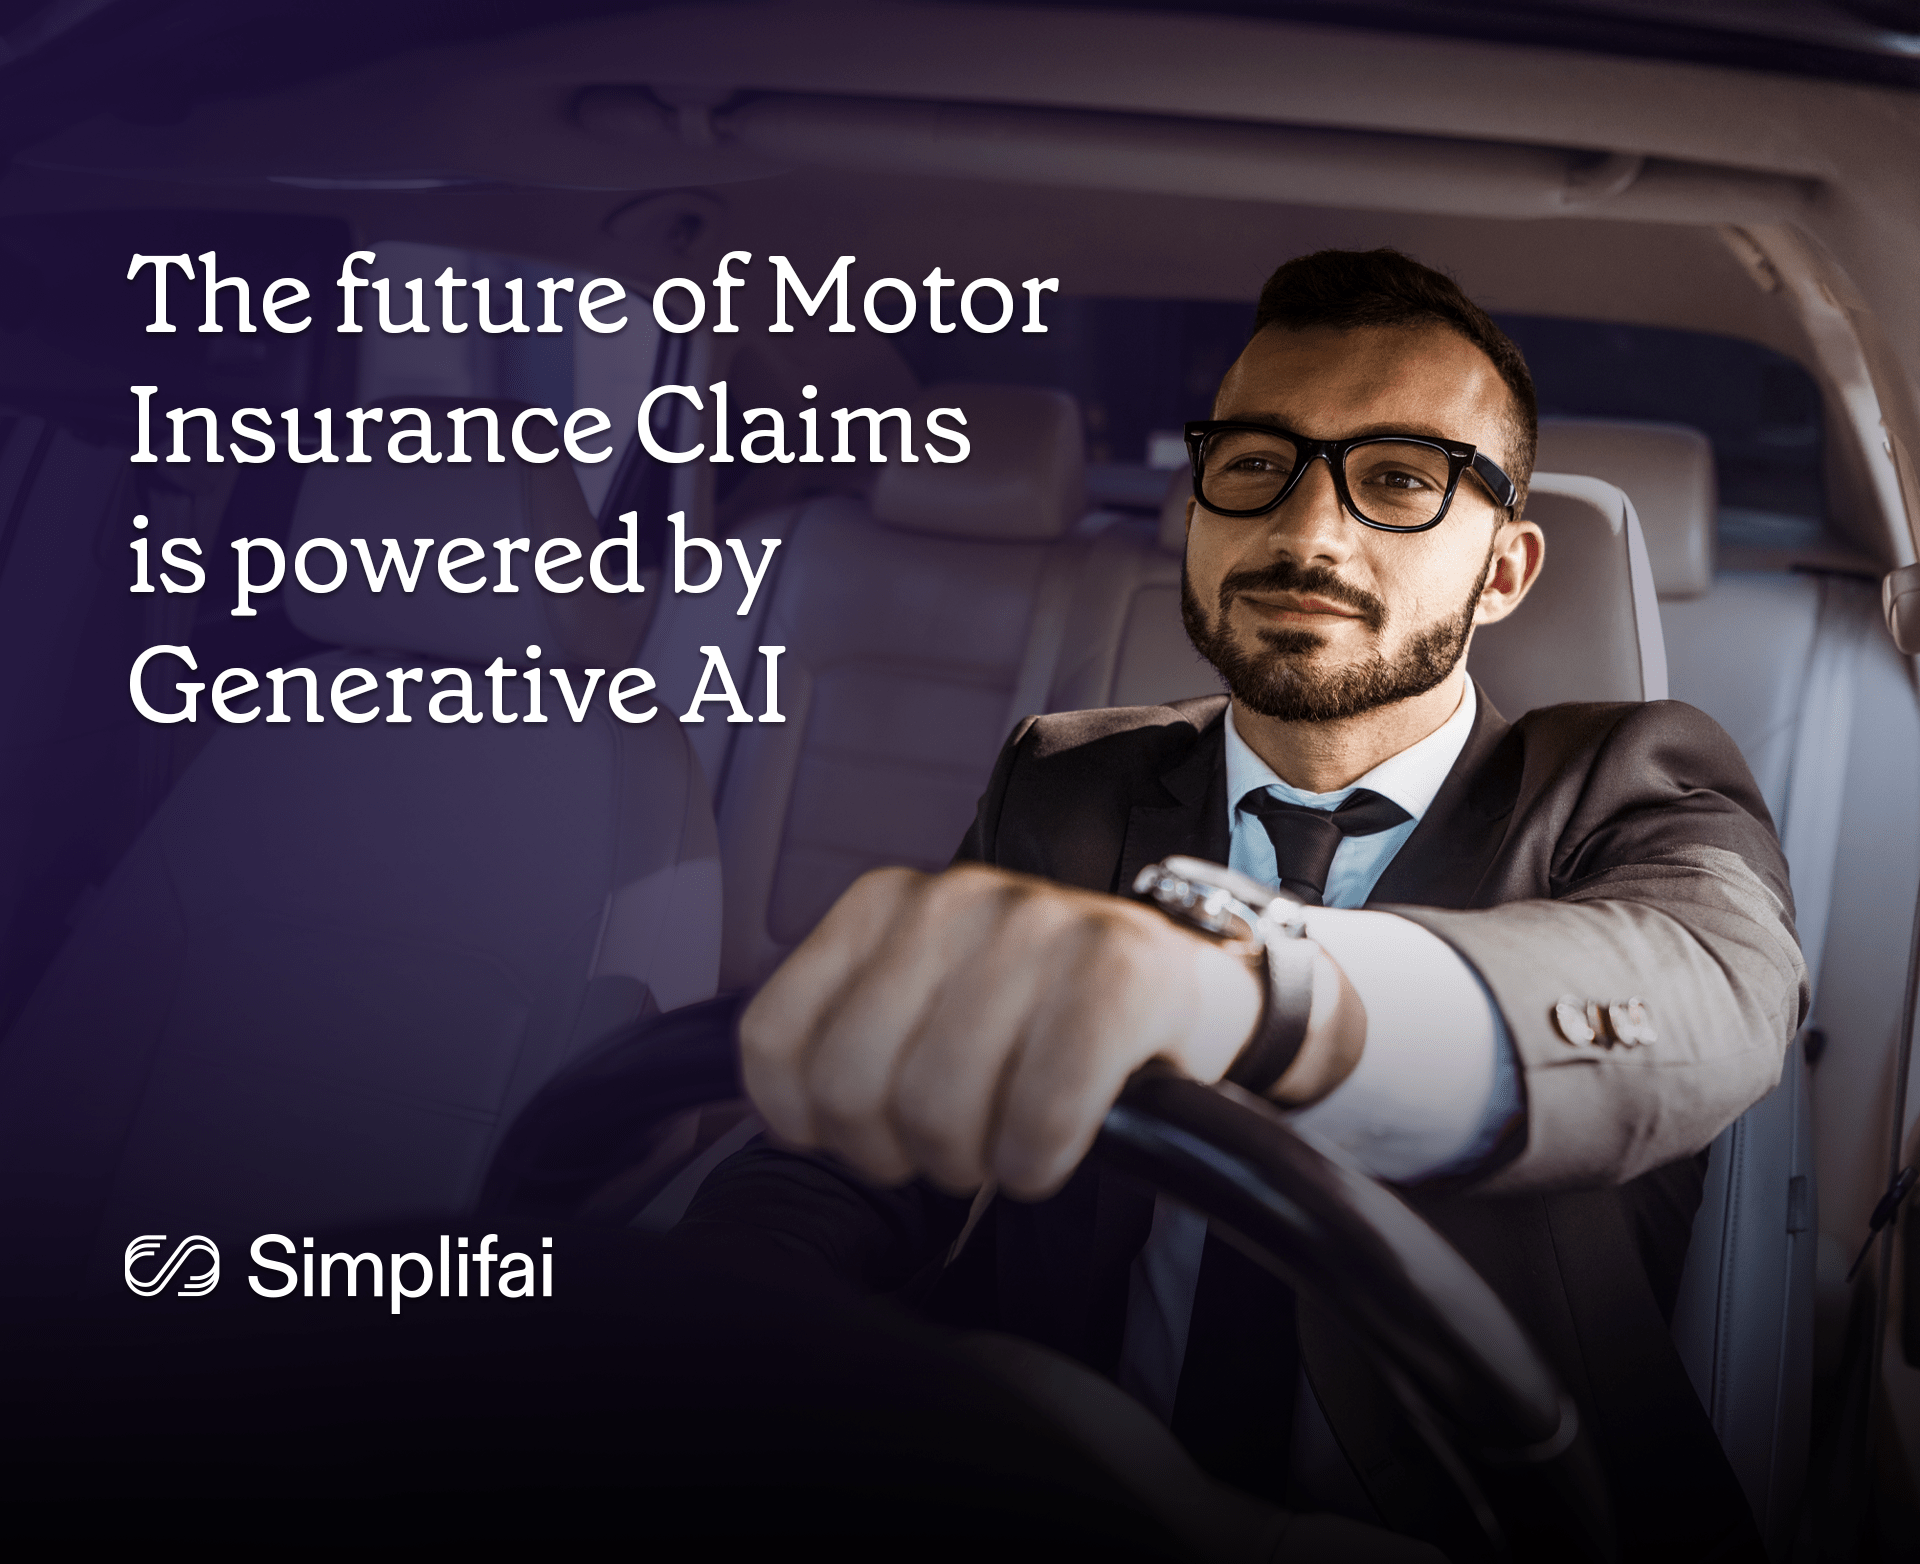 The future of Motor Insurance Claims is powered by Generative AI